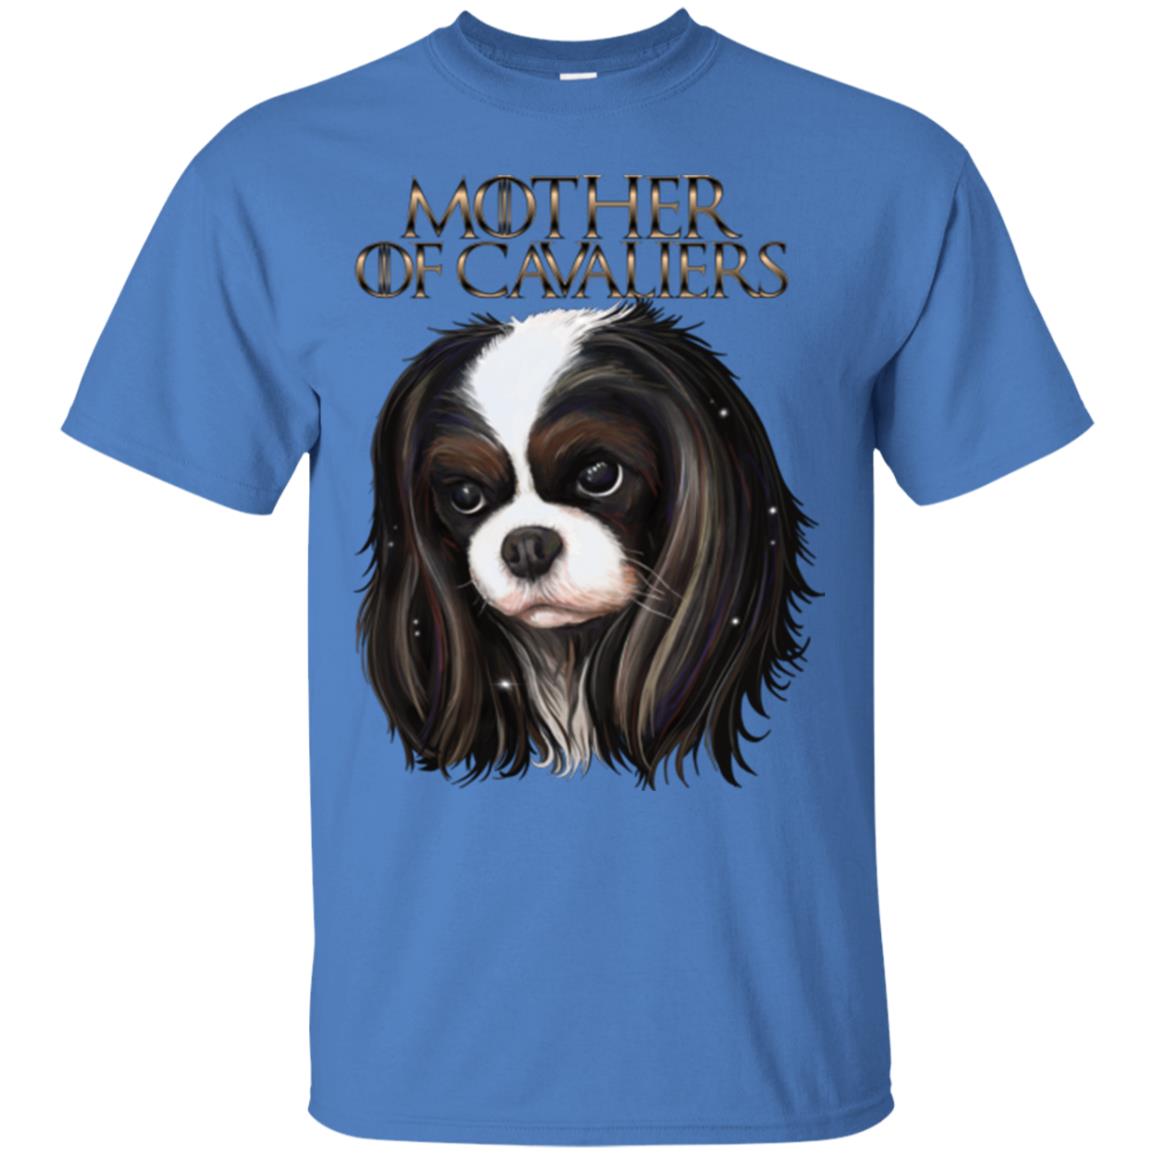 Mother of Cavaliers, Cavalier King Charles Spaniel Shirt - GoneBold.gift